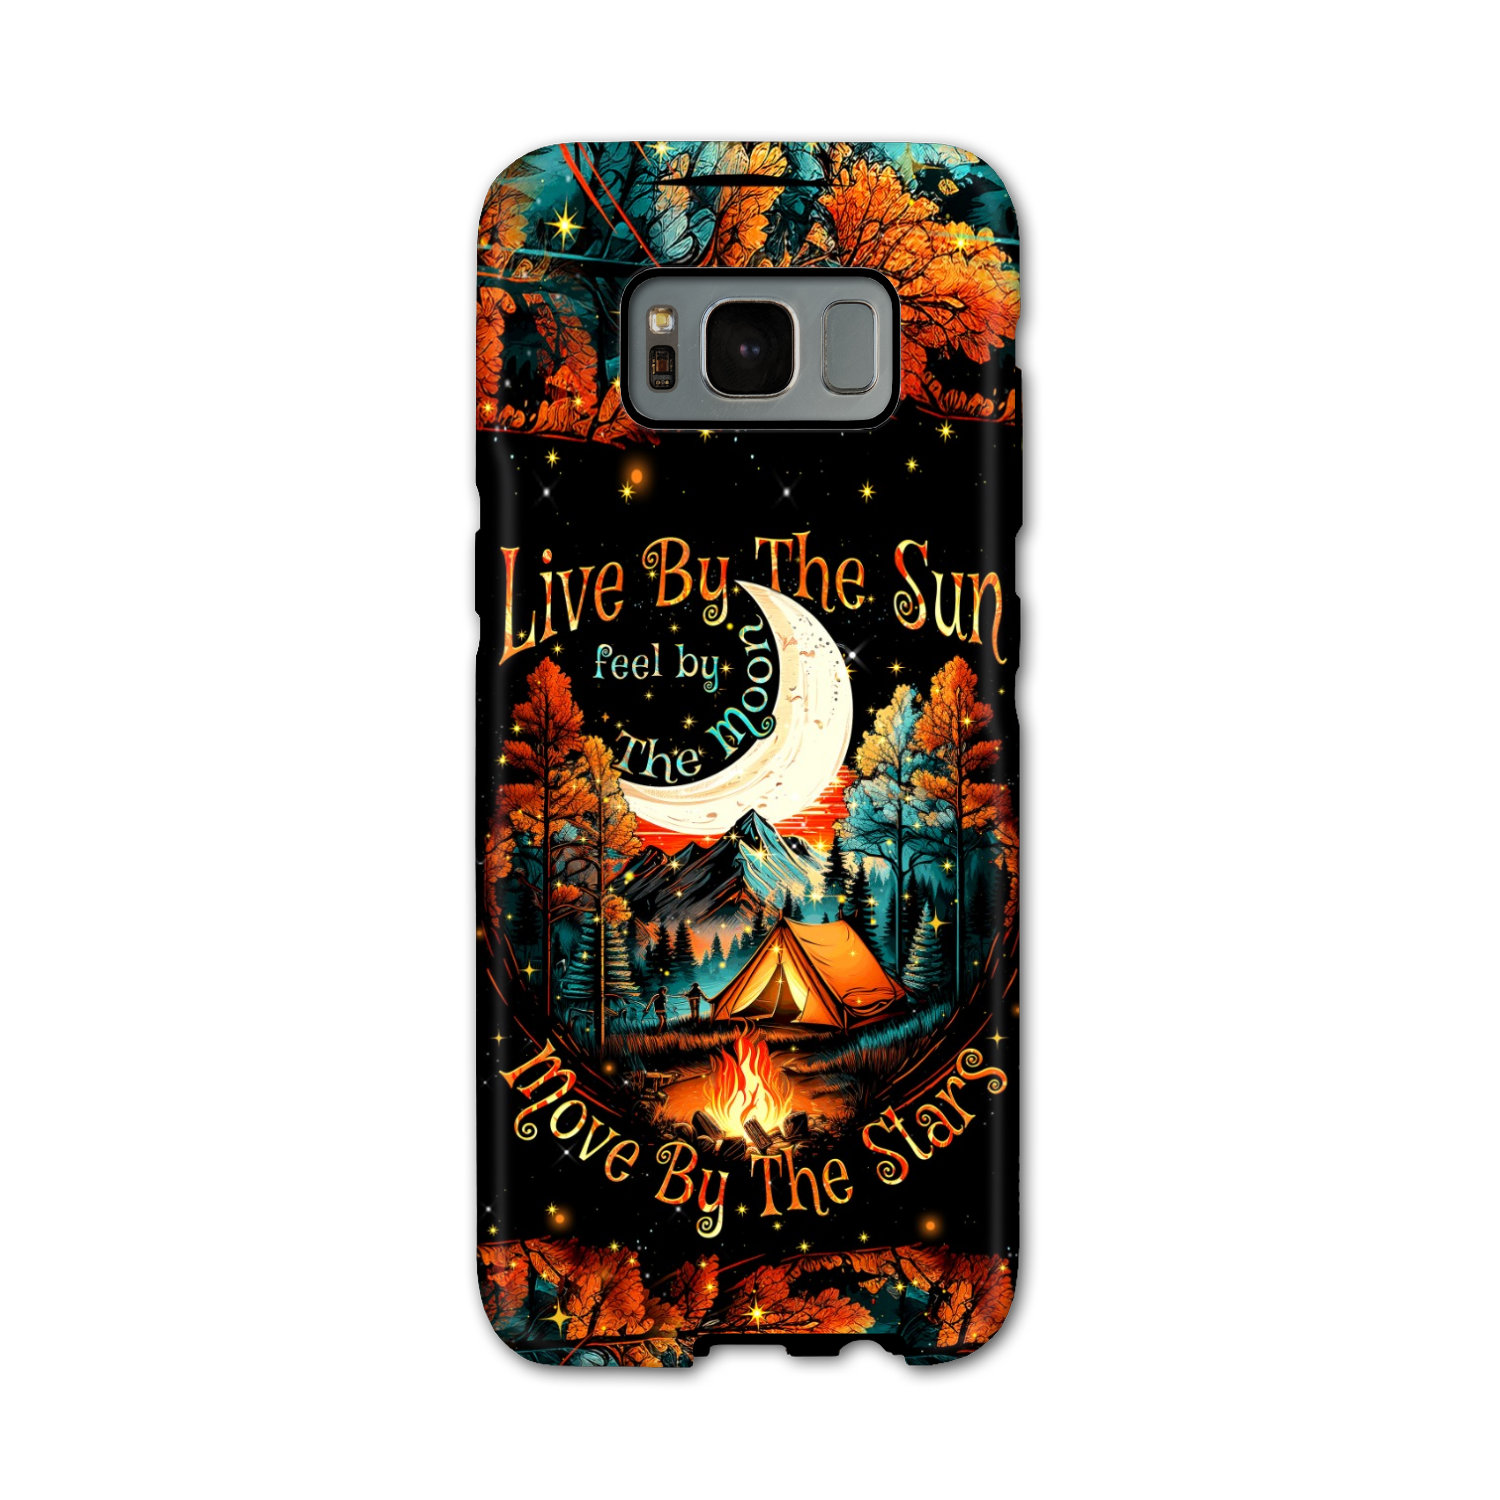 MOVE BY THE STARS PHONE CASE - TYTM2404232